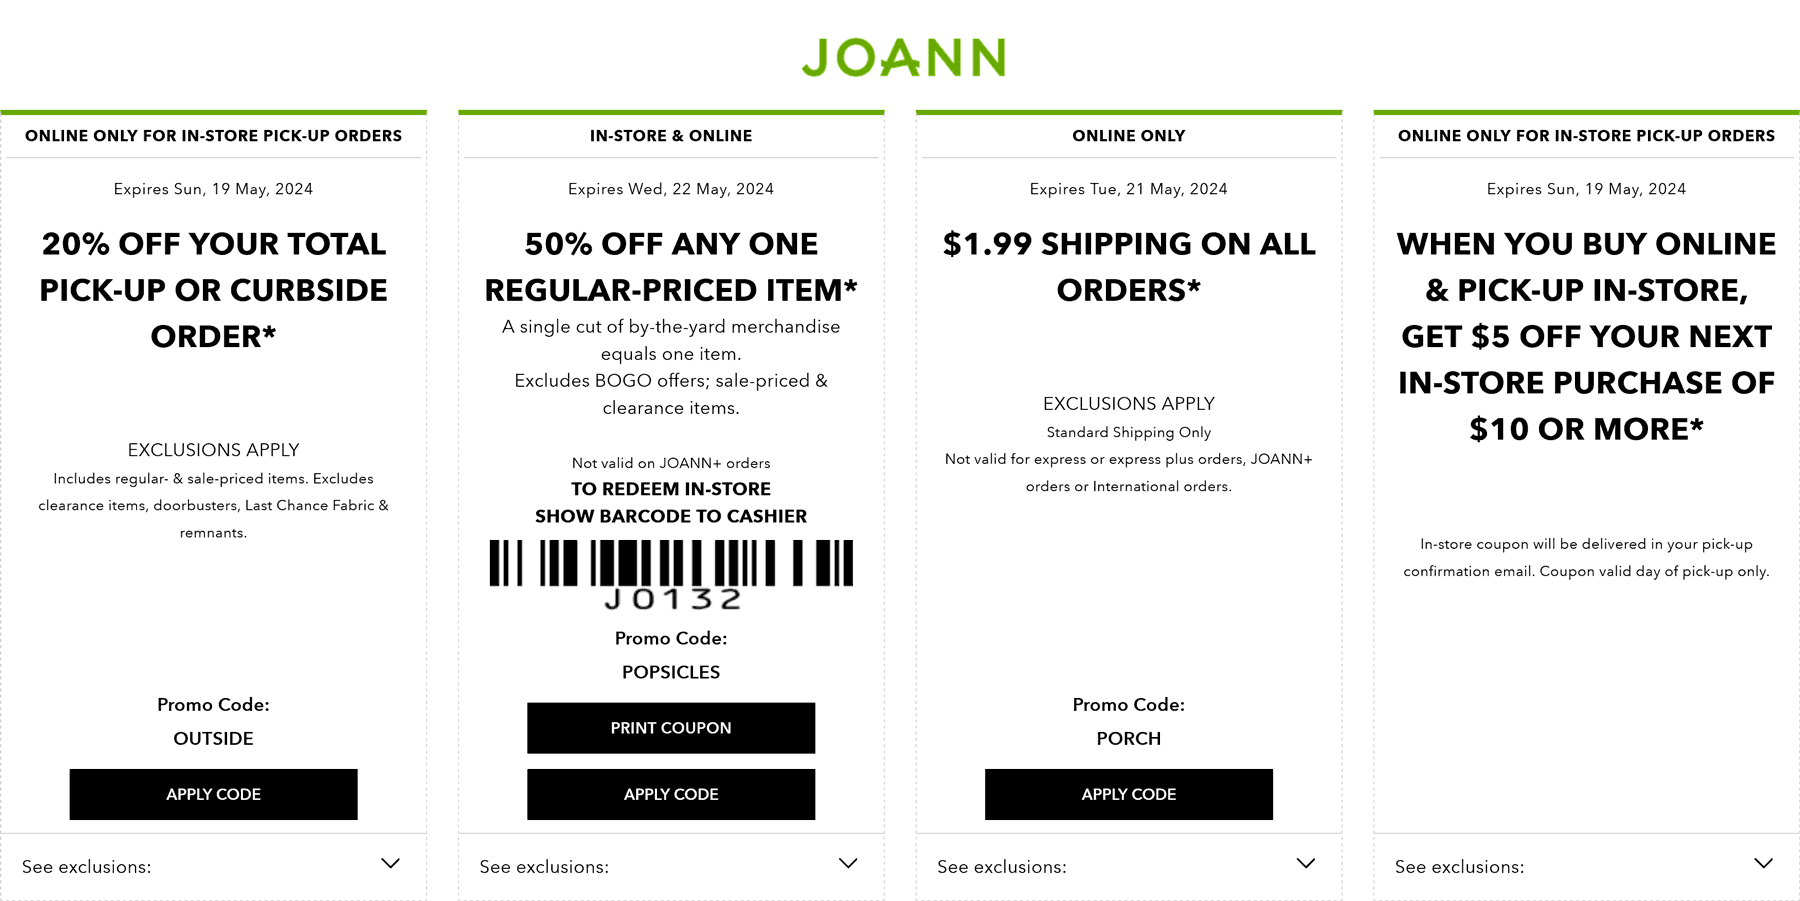 Joann stores Coupon  50% off a single item at Joann, or online via promo code POPSICLES #joann 